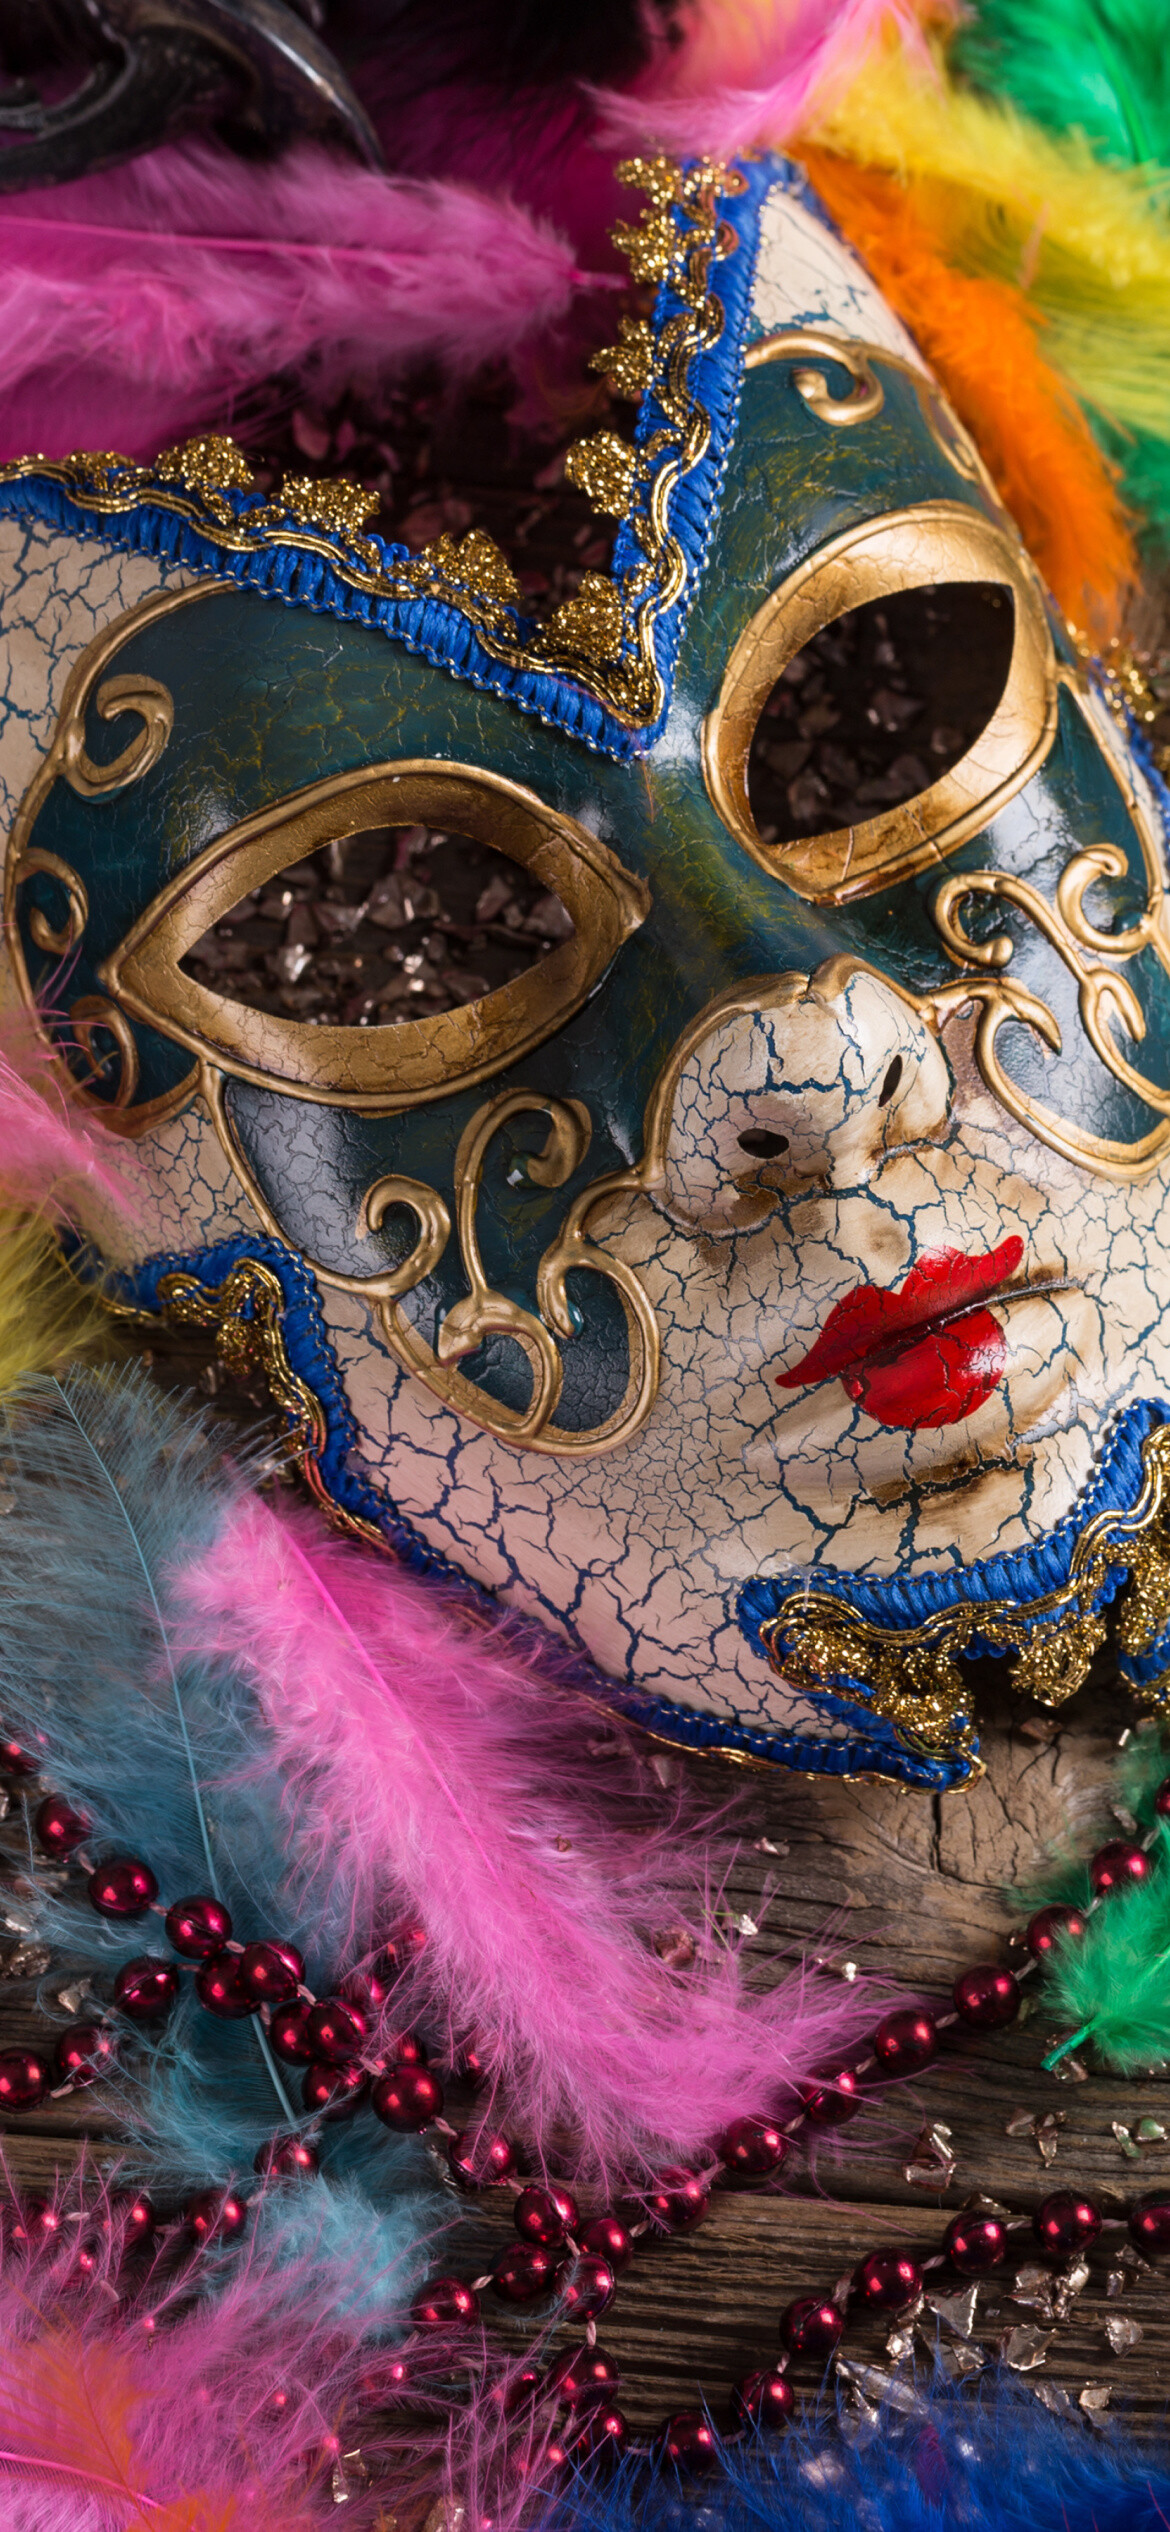 Carnival: It began in 1162 in celebration of the Venice Republic's victory over its enemy. 1170x2540 HD Wallpaper.